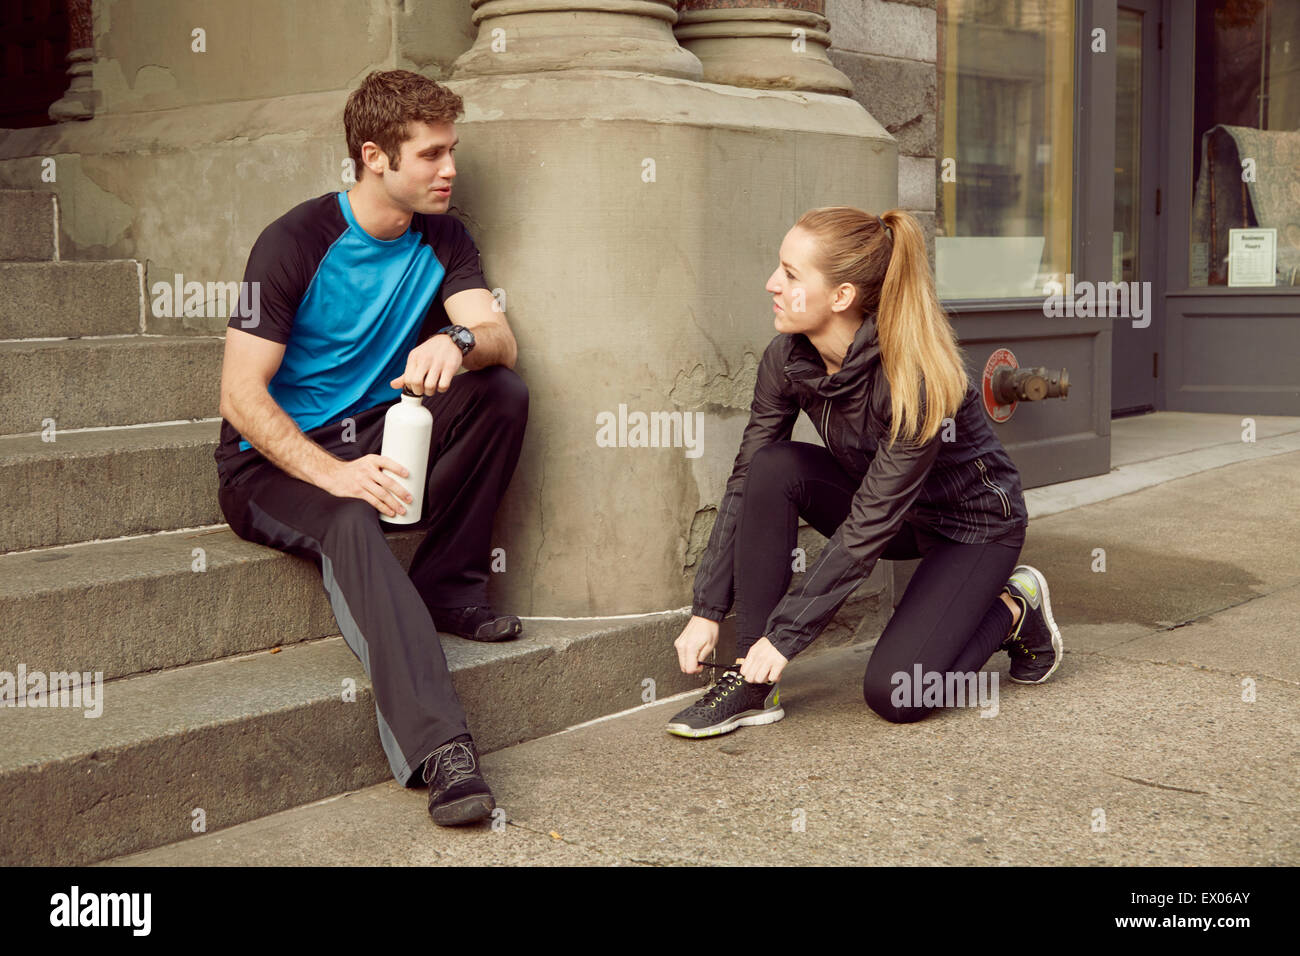 Young male and female runners preparing for run on sidewalk Stock Photo